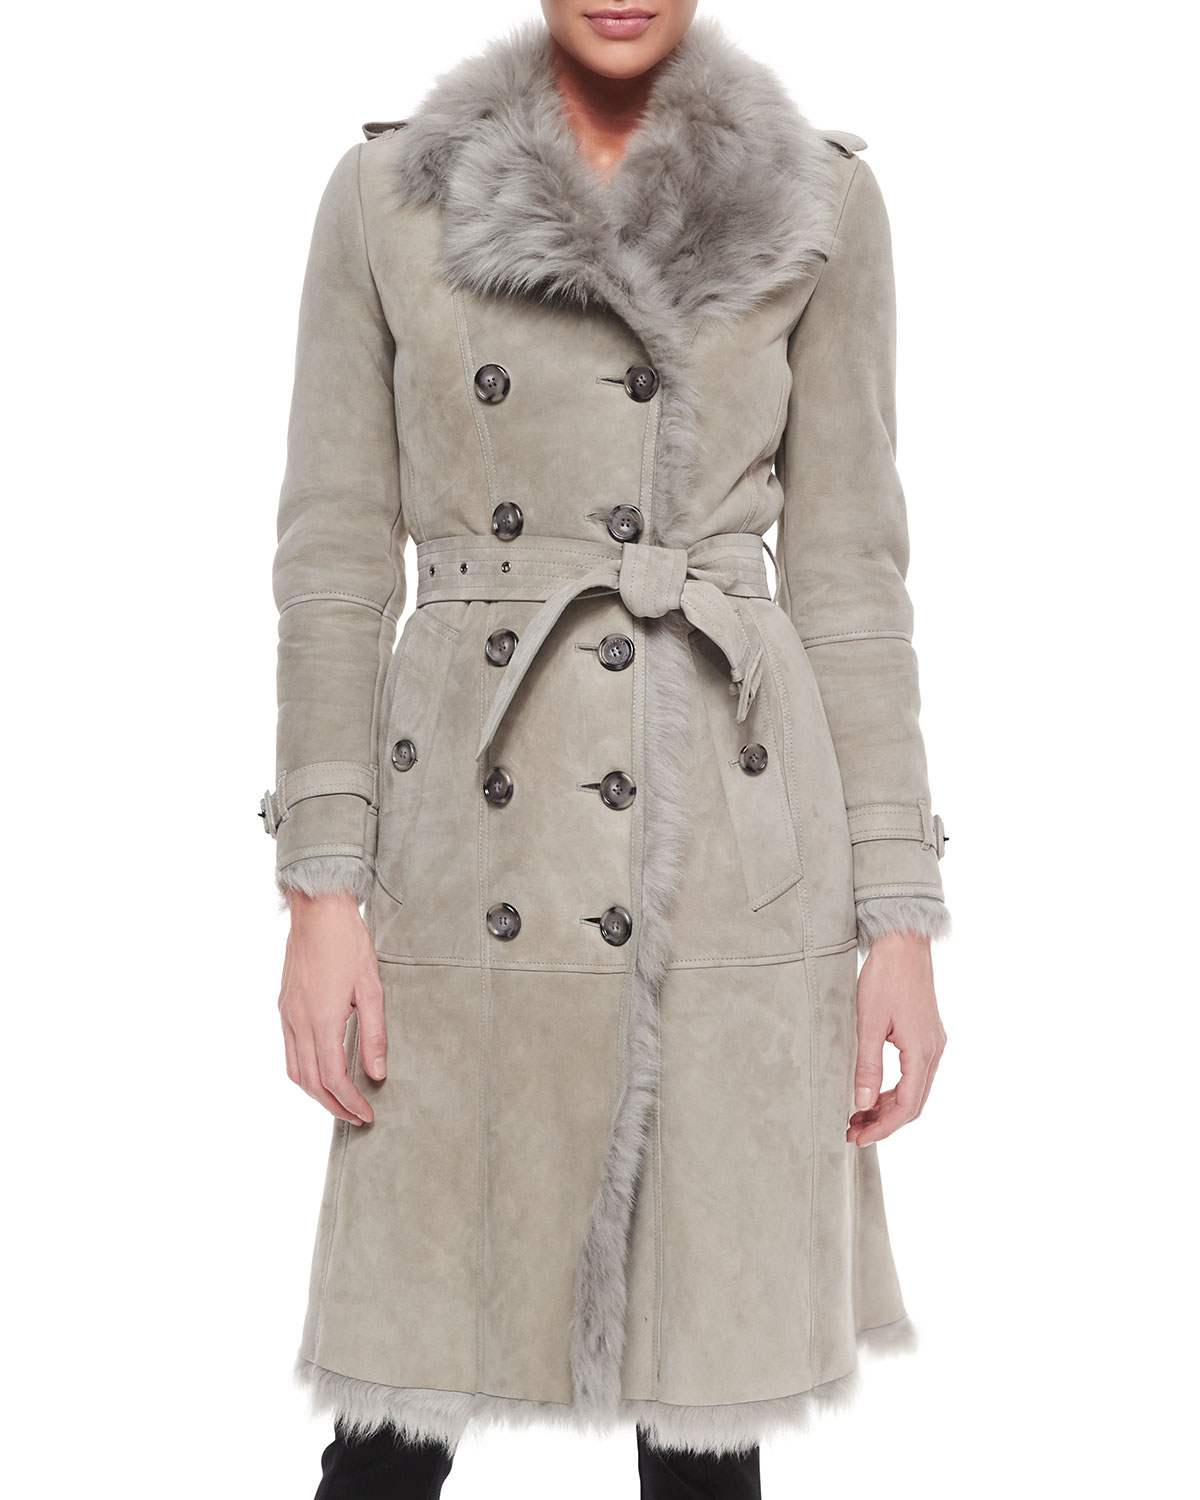 burberry shearling trench